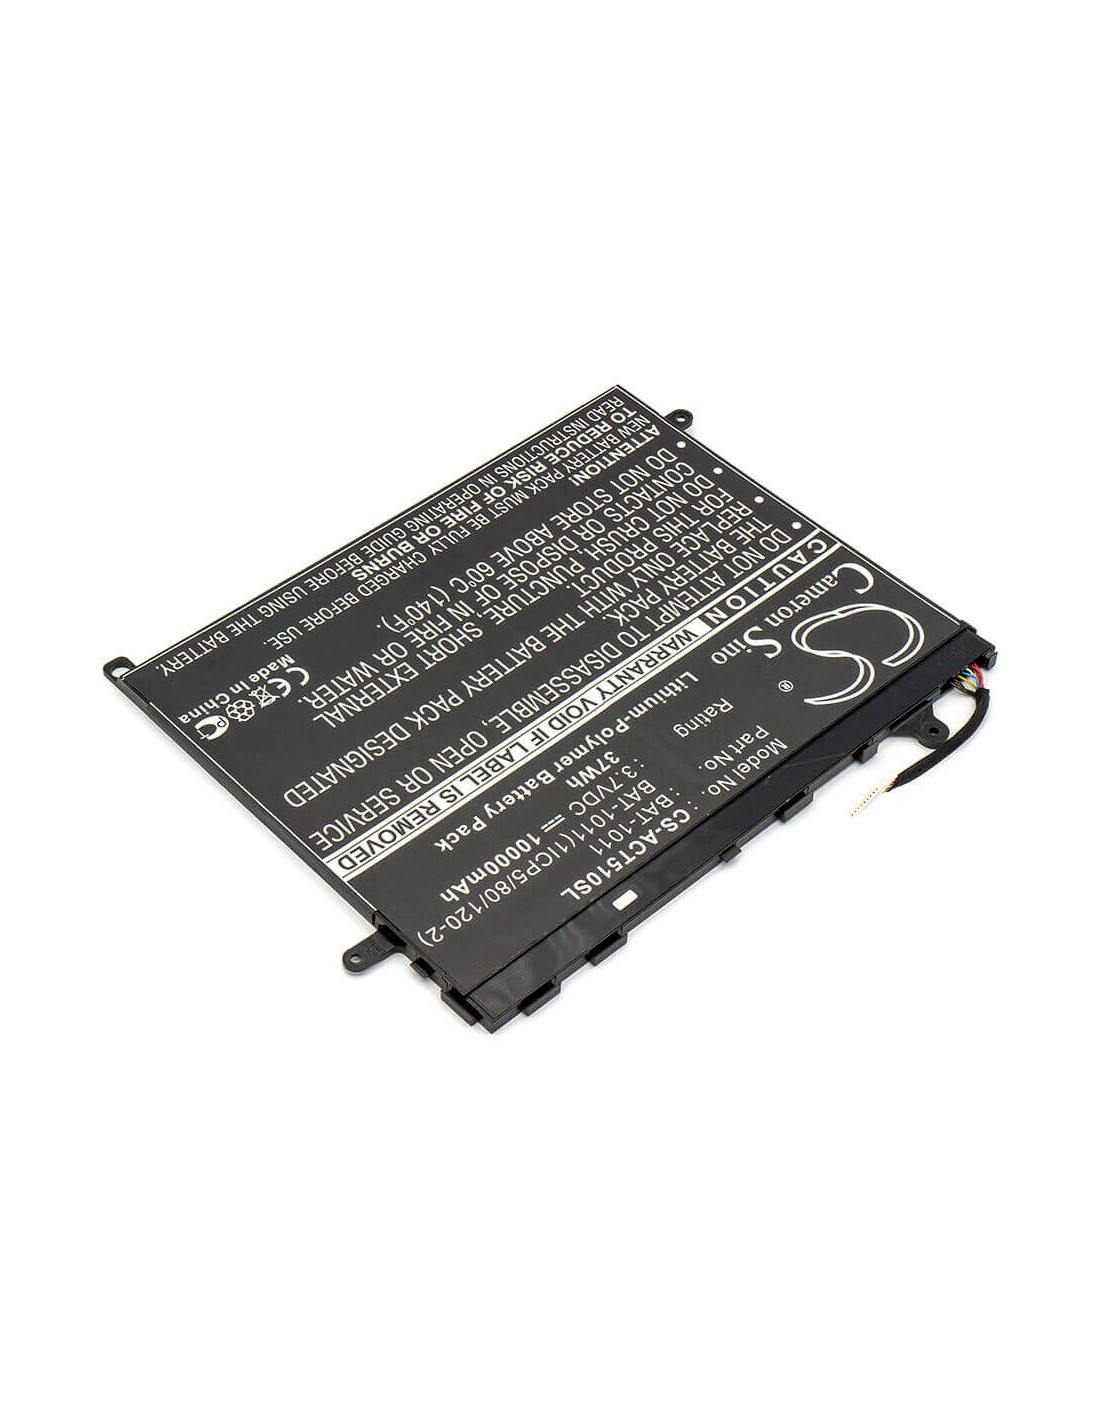 Battery for Acer Iconia Tab A510, Iconia Tab A700, Iconia Tab A710 3.7V, 10000mAh - 37.00Wh